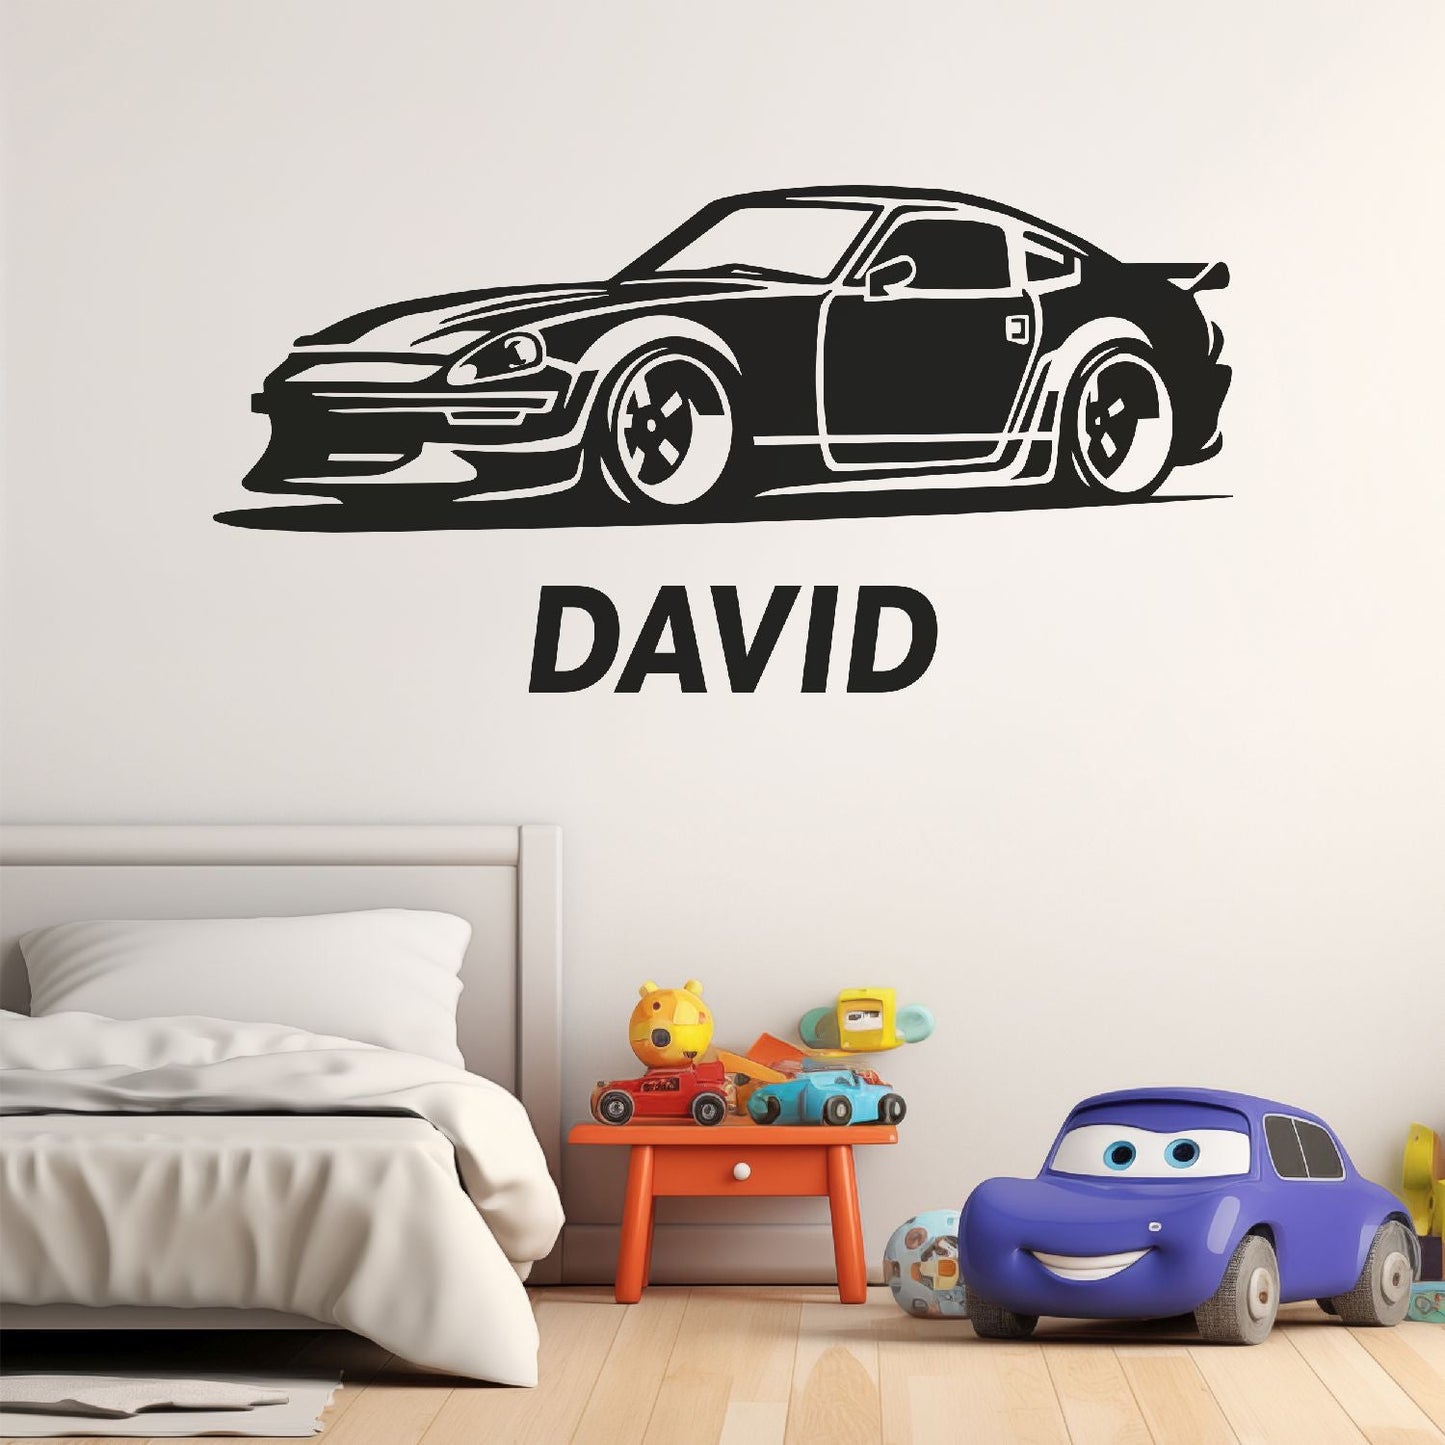 Racing Car Wall Decals - Boys Room Wall Stickers - Car Wall Stickers for Boys Room - Nascar Stickers and Decals - Race Car Decor with Name